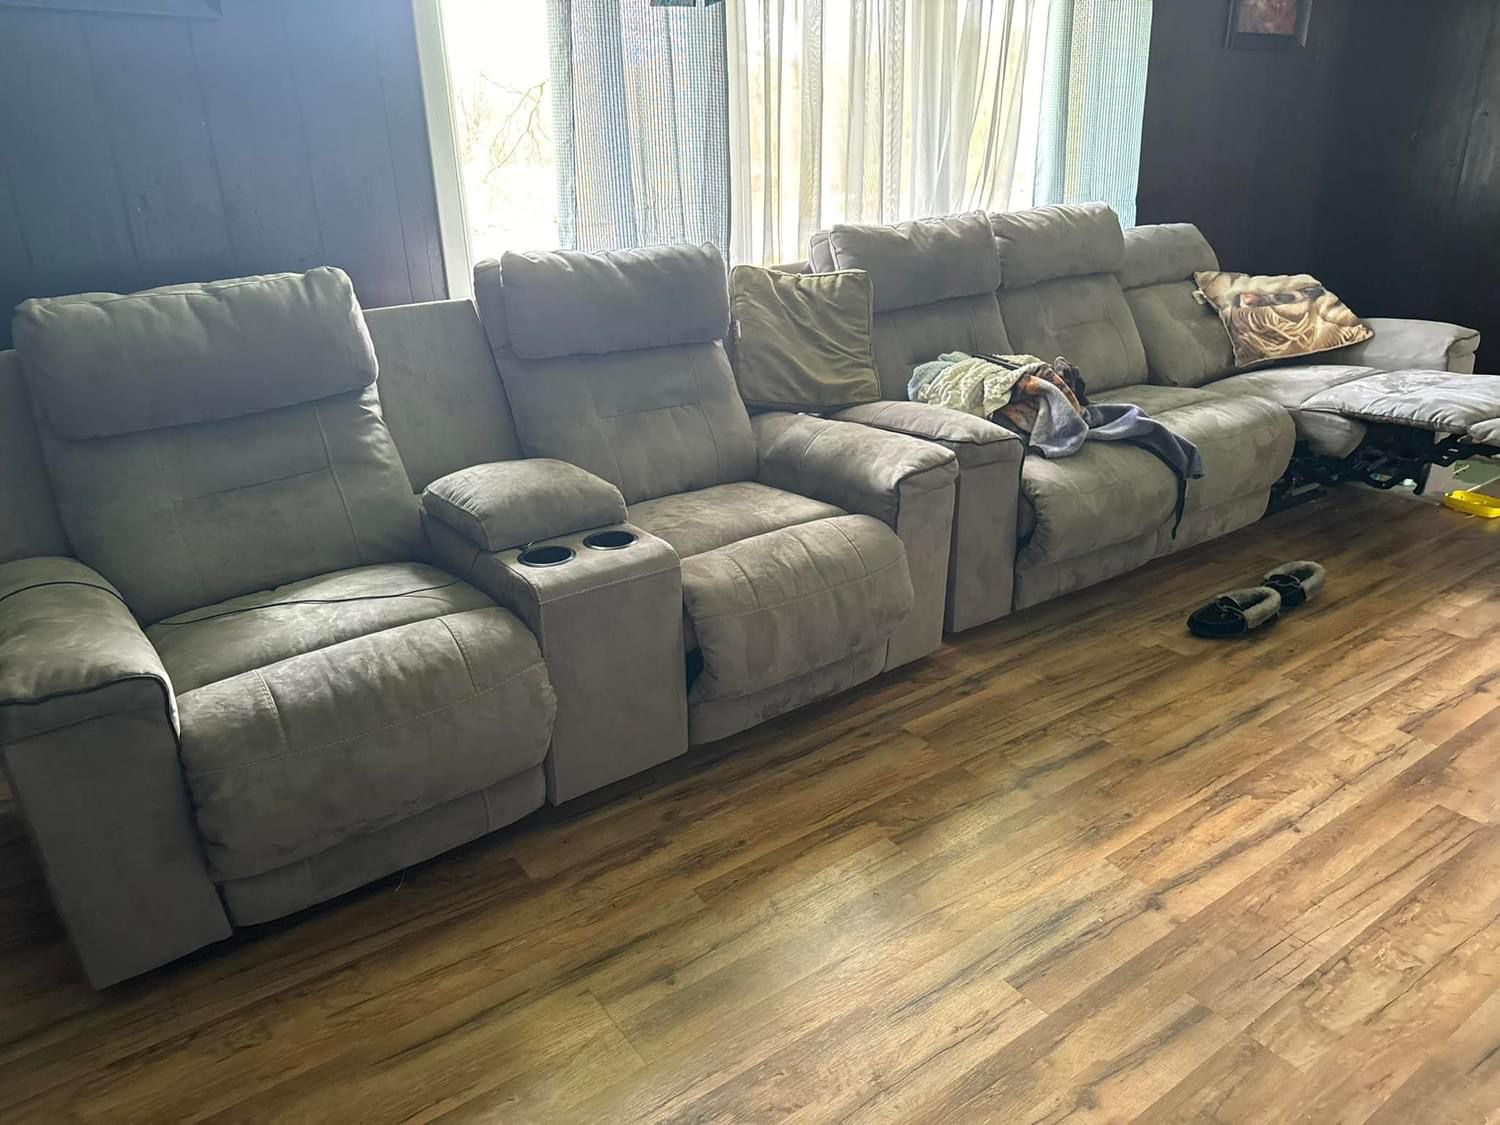 Two Reclining Couches 